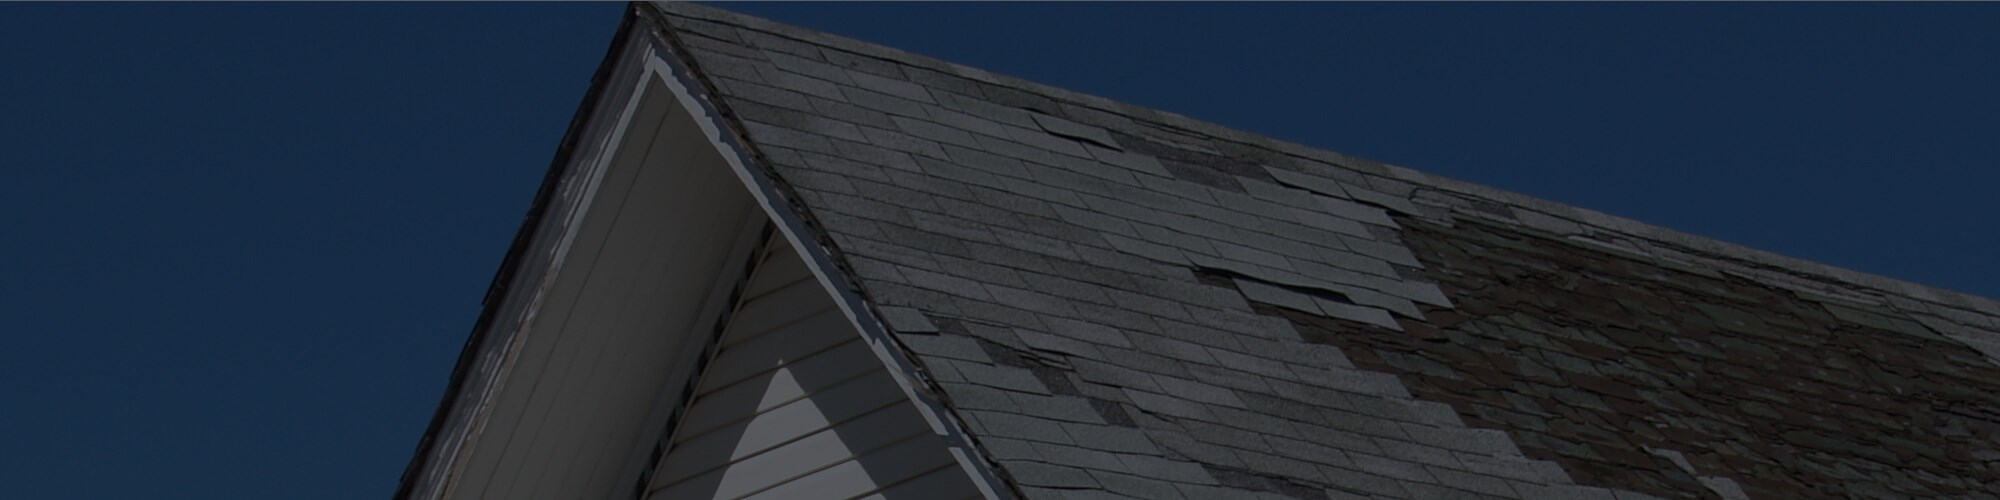 Seattle roofing company claim assistance for roof insurance